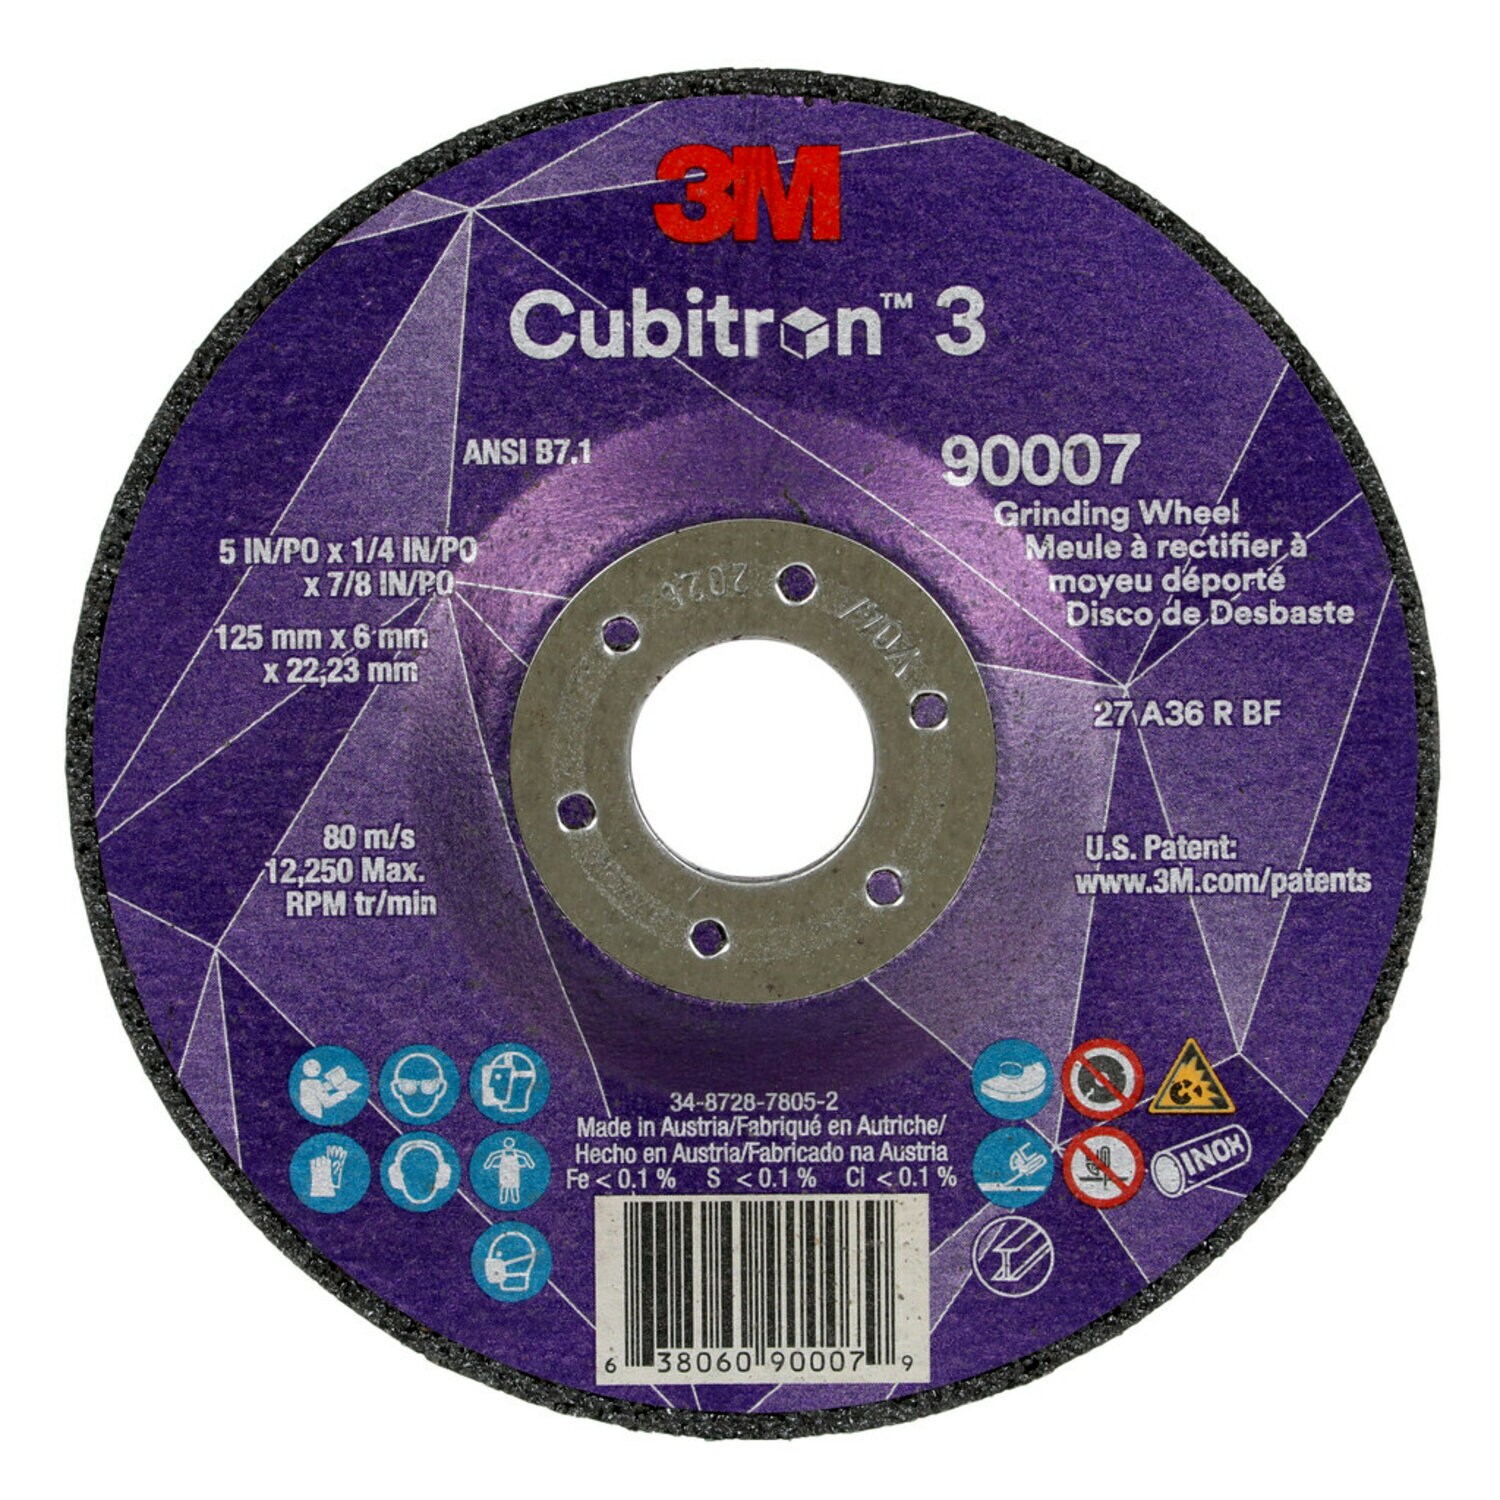 7100303967 - 3M Cubitron 3 Depressed Center Grinding Wheel, 90007, 36+, T27, 5 in x
1/4 in x 7/8 in (125x6x22.23mm) ANSI, 10/Pack, 20 ea/Case